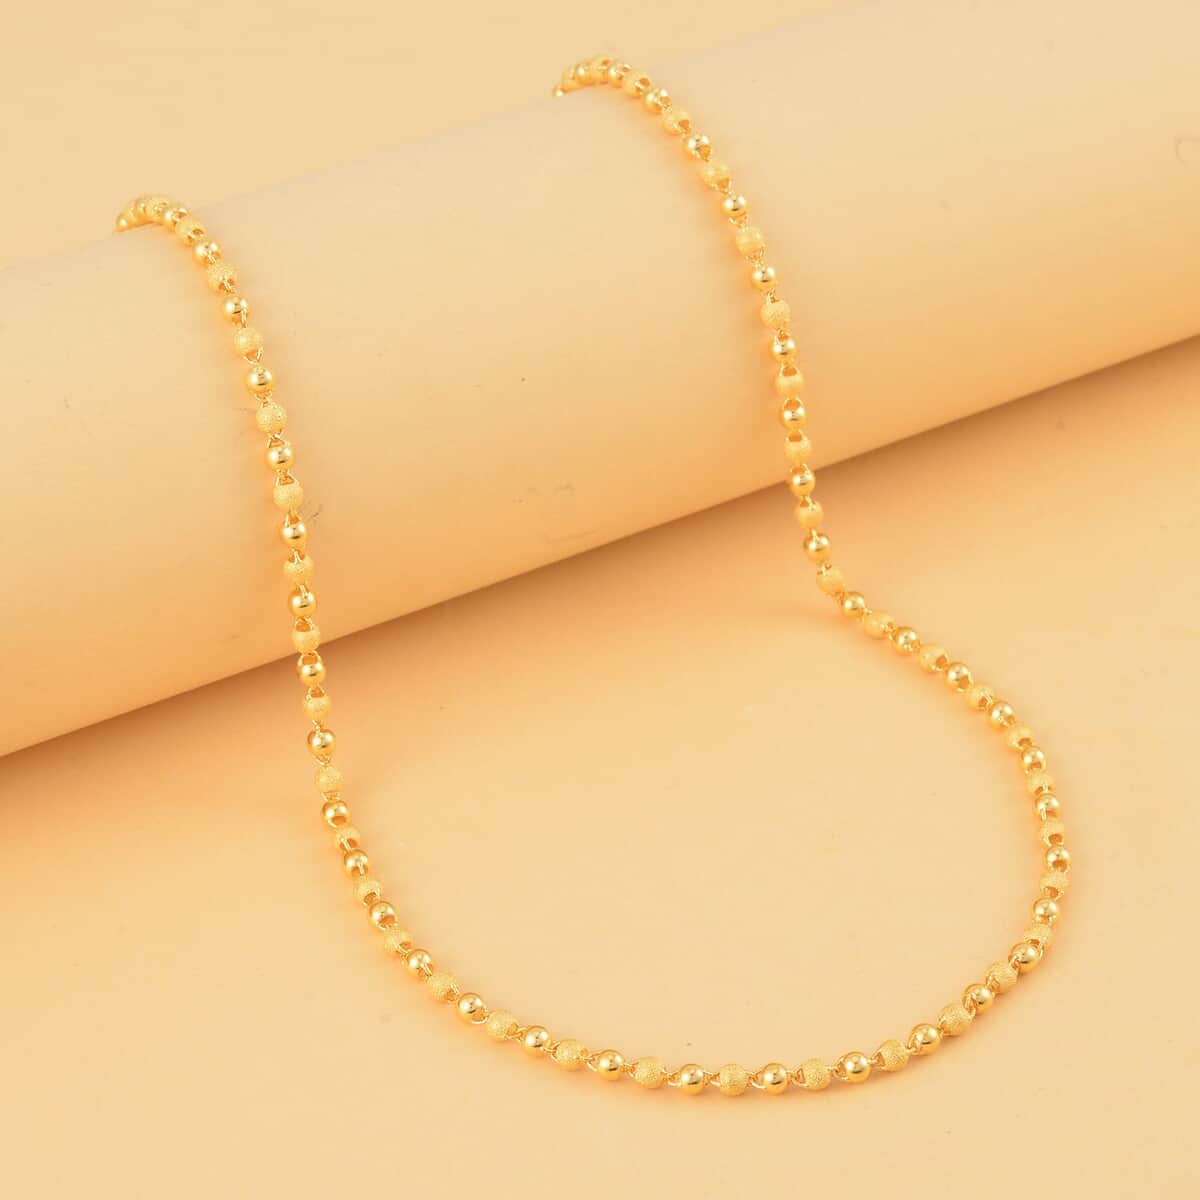 Ankur Treasure Chest 24K Yellow Gold Electroform 4mm Textured Beaded Necklace 18 Inches 14.65 Grams image number 1